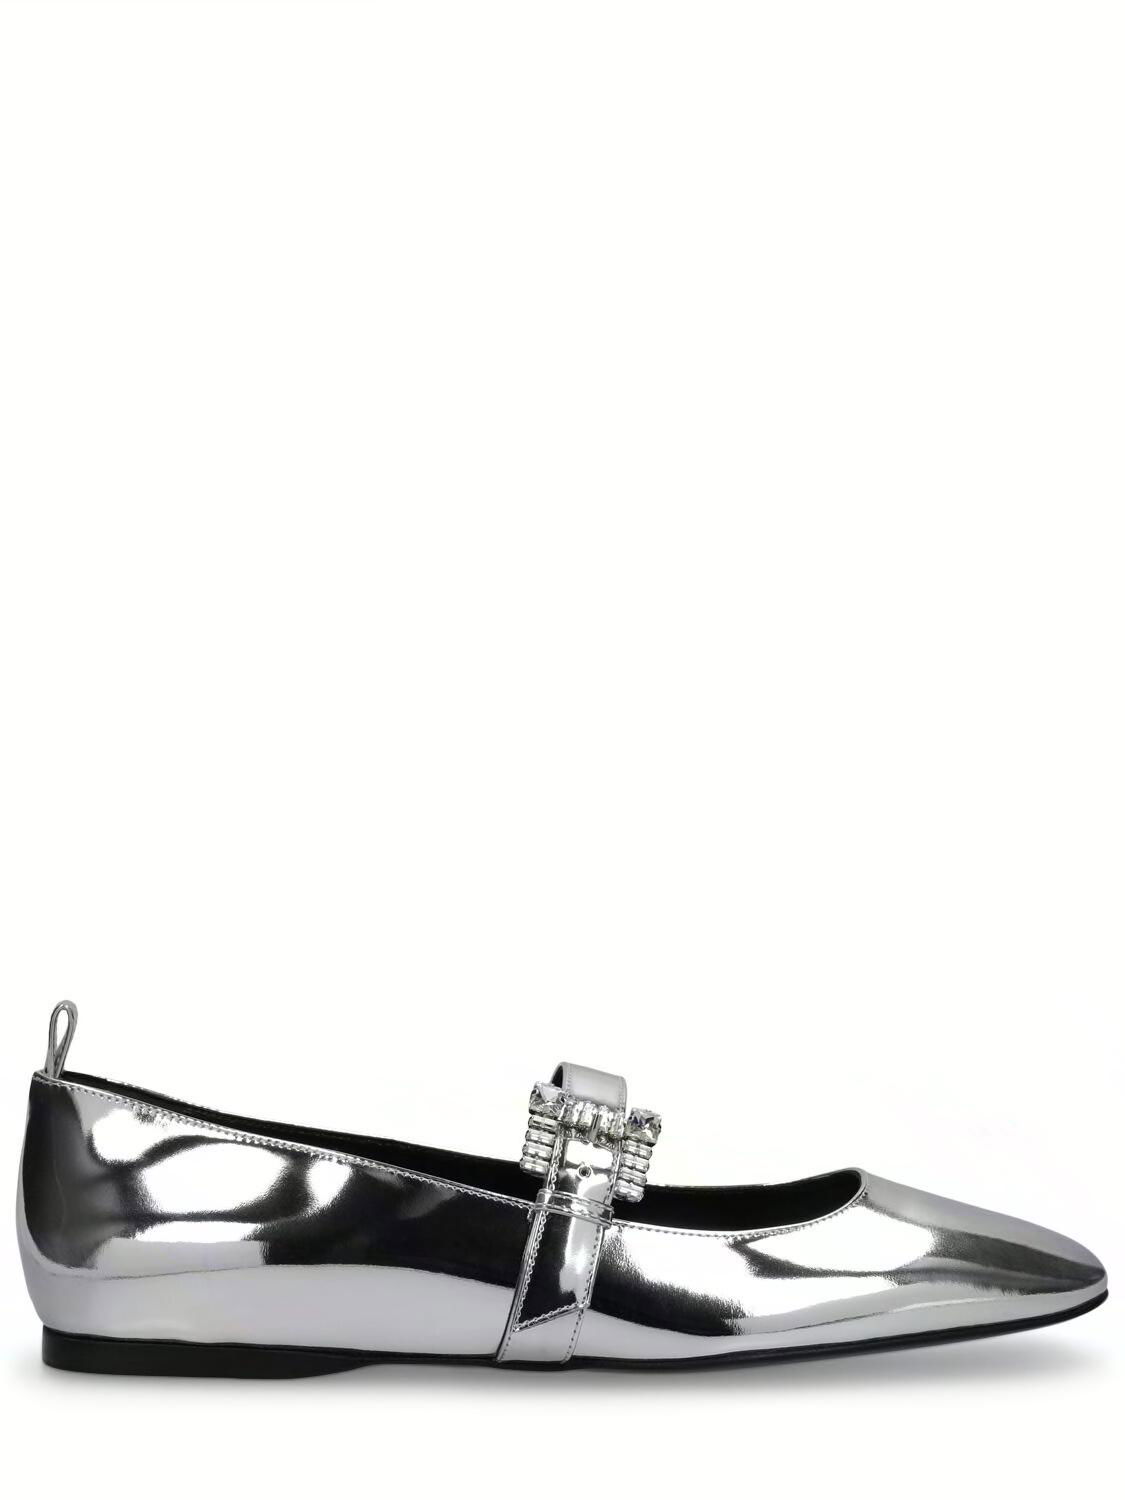 Mirror Leather Ballerina Flats by SERGIO ROSSI